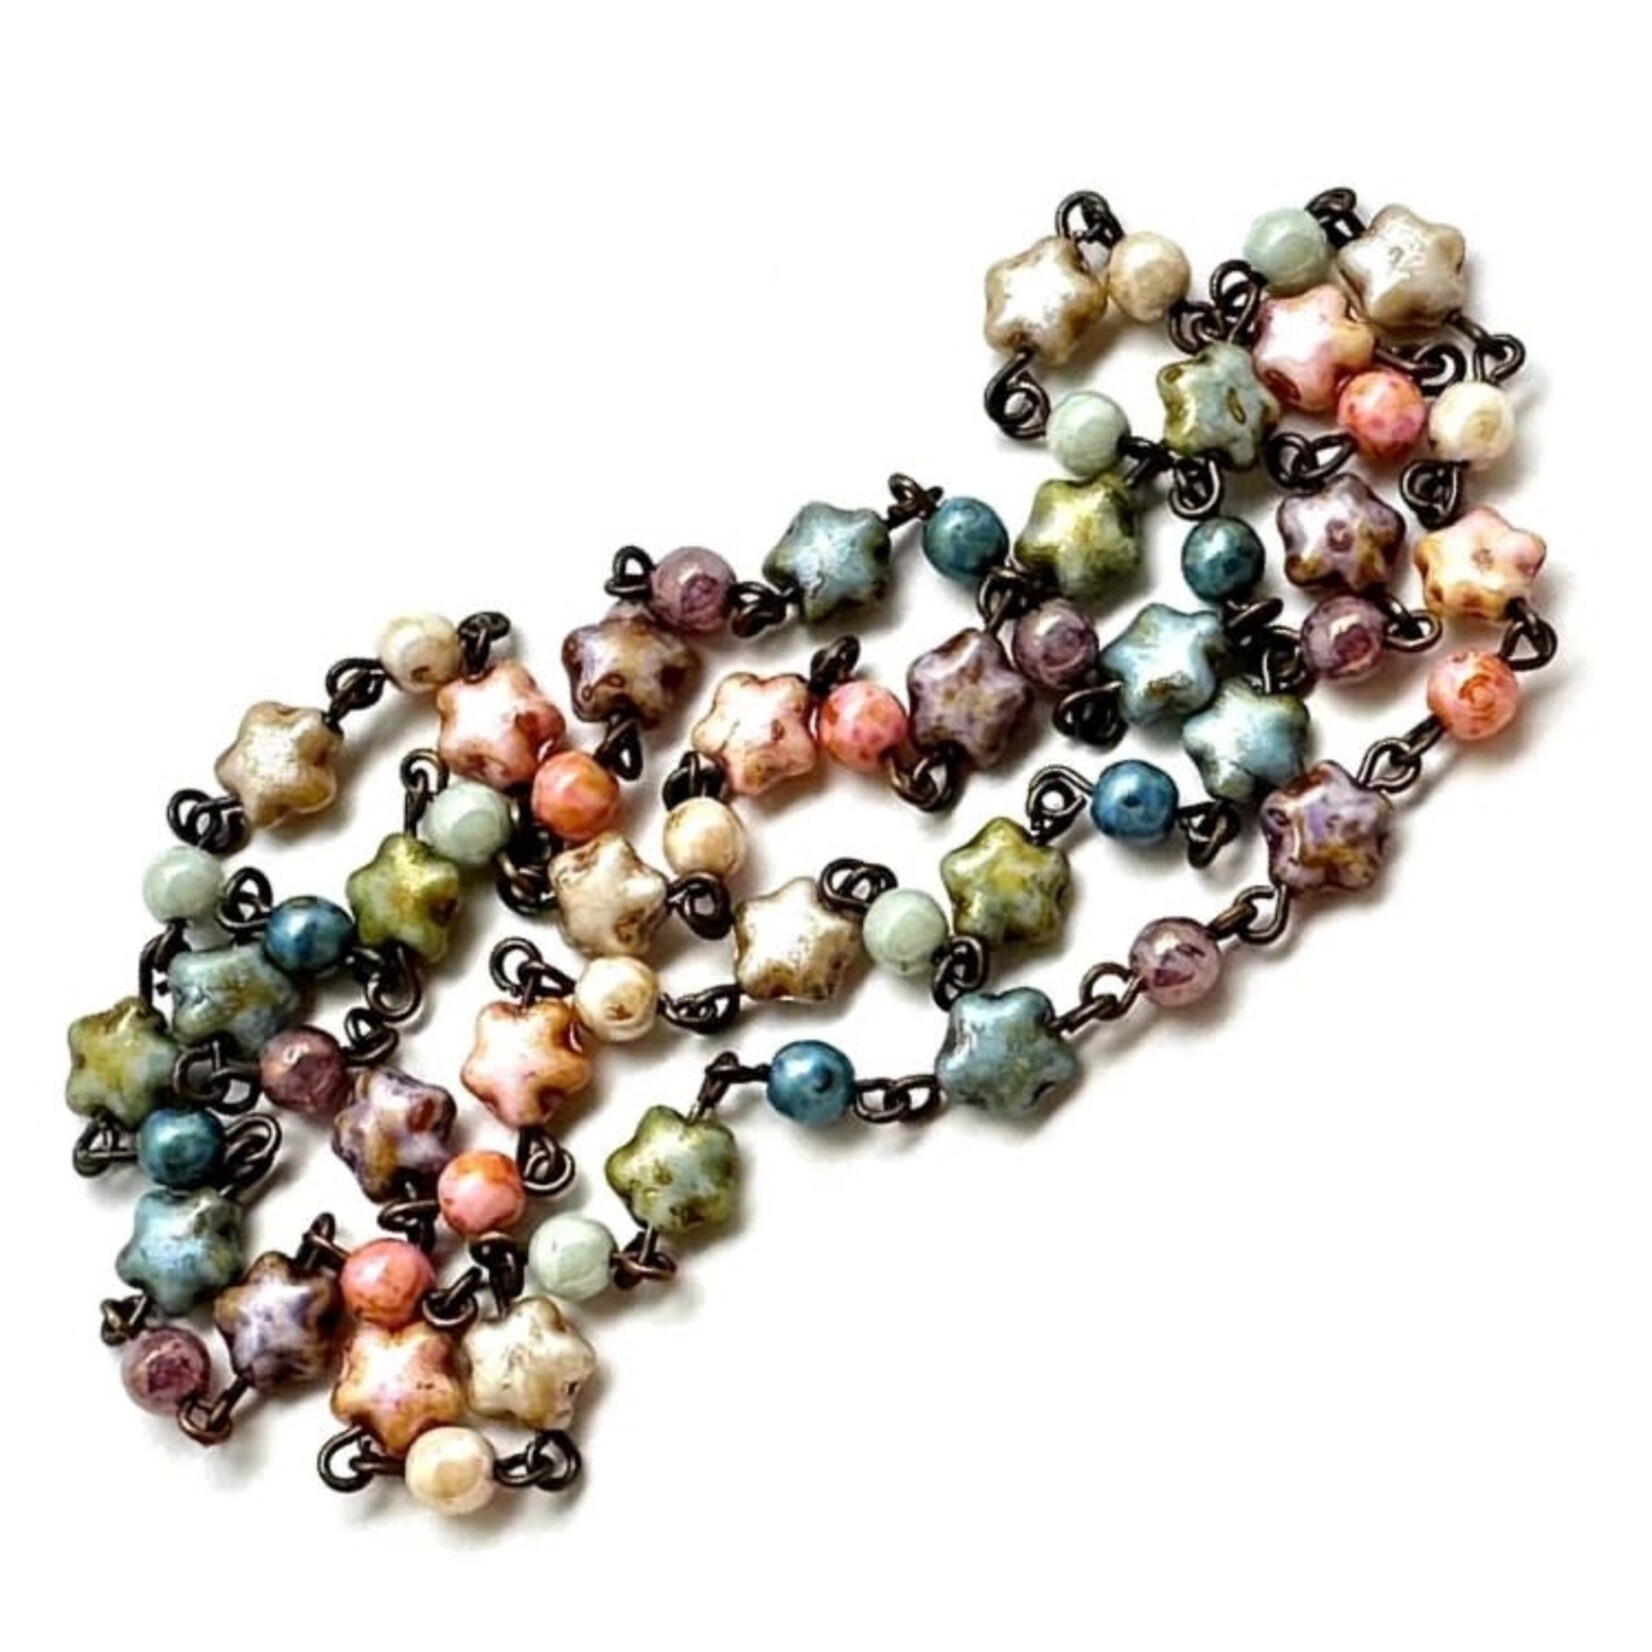 Czech Glass Beaded Chain Pastel with Stars - 1 Foot